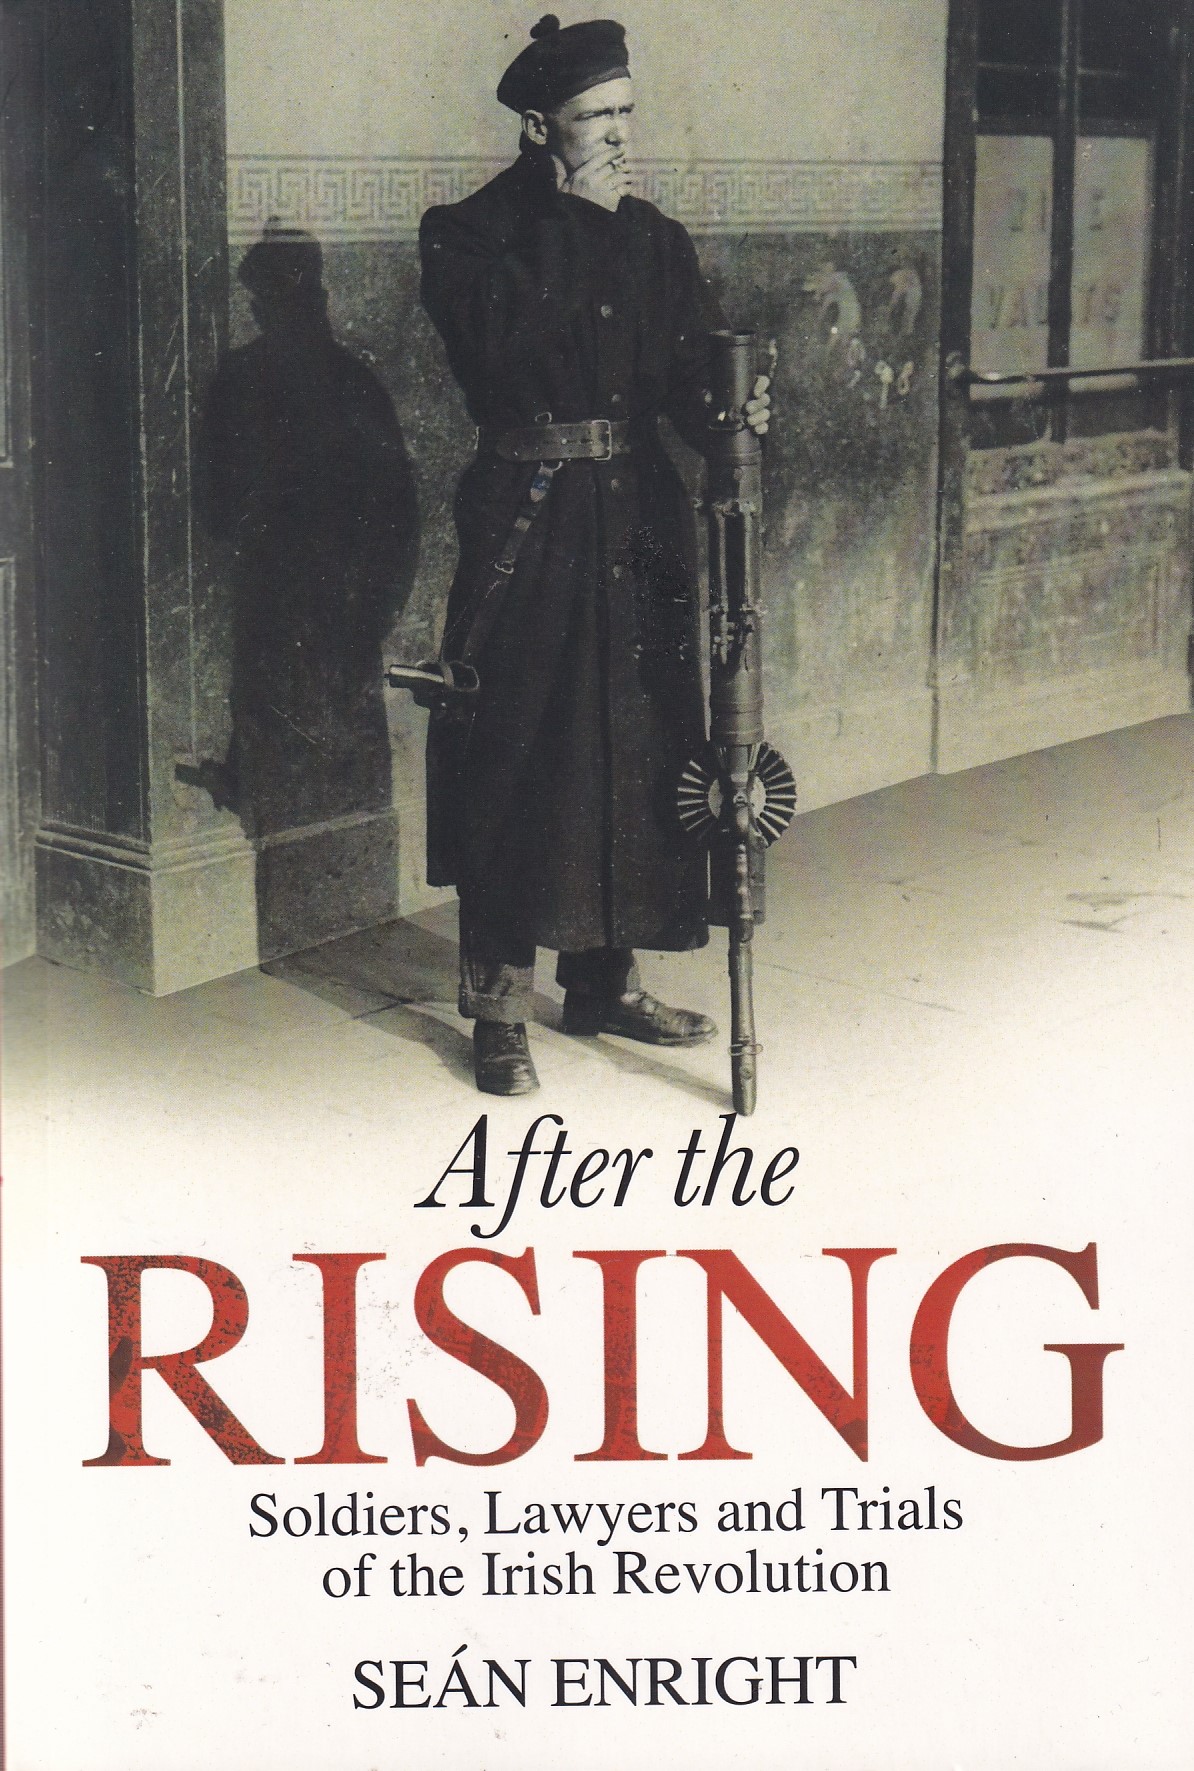 After the Rising: Soldiers, Lawyers and Trials of the Irish Revolution by Sean Enright